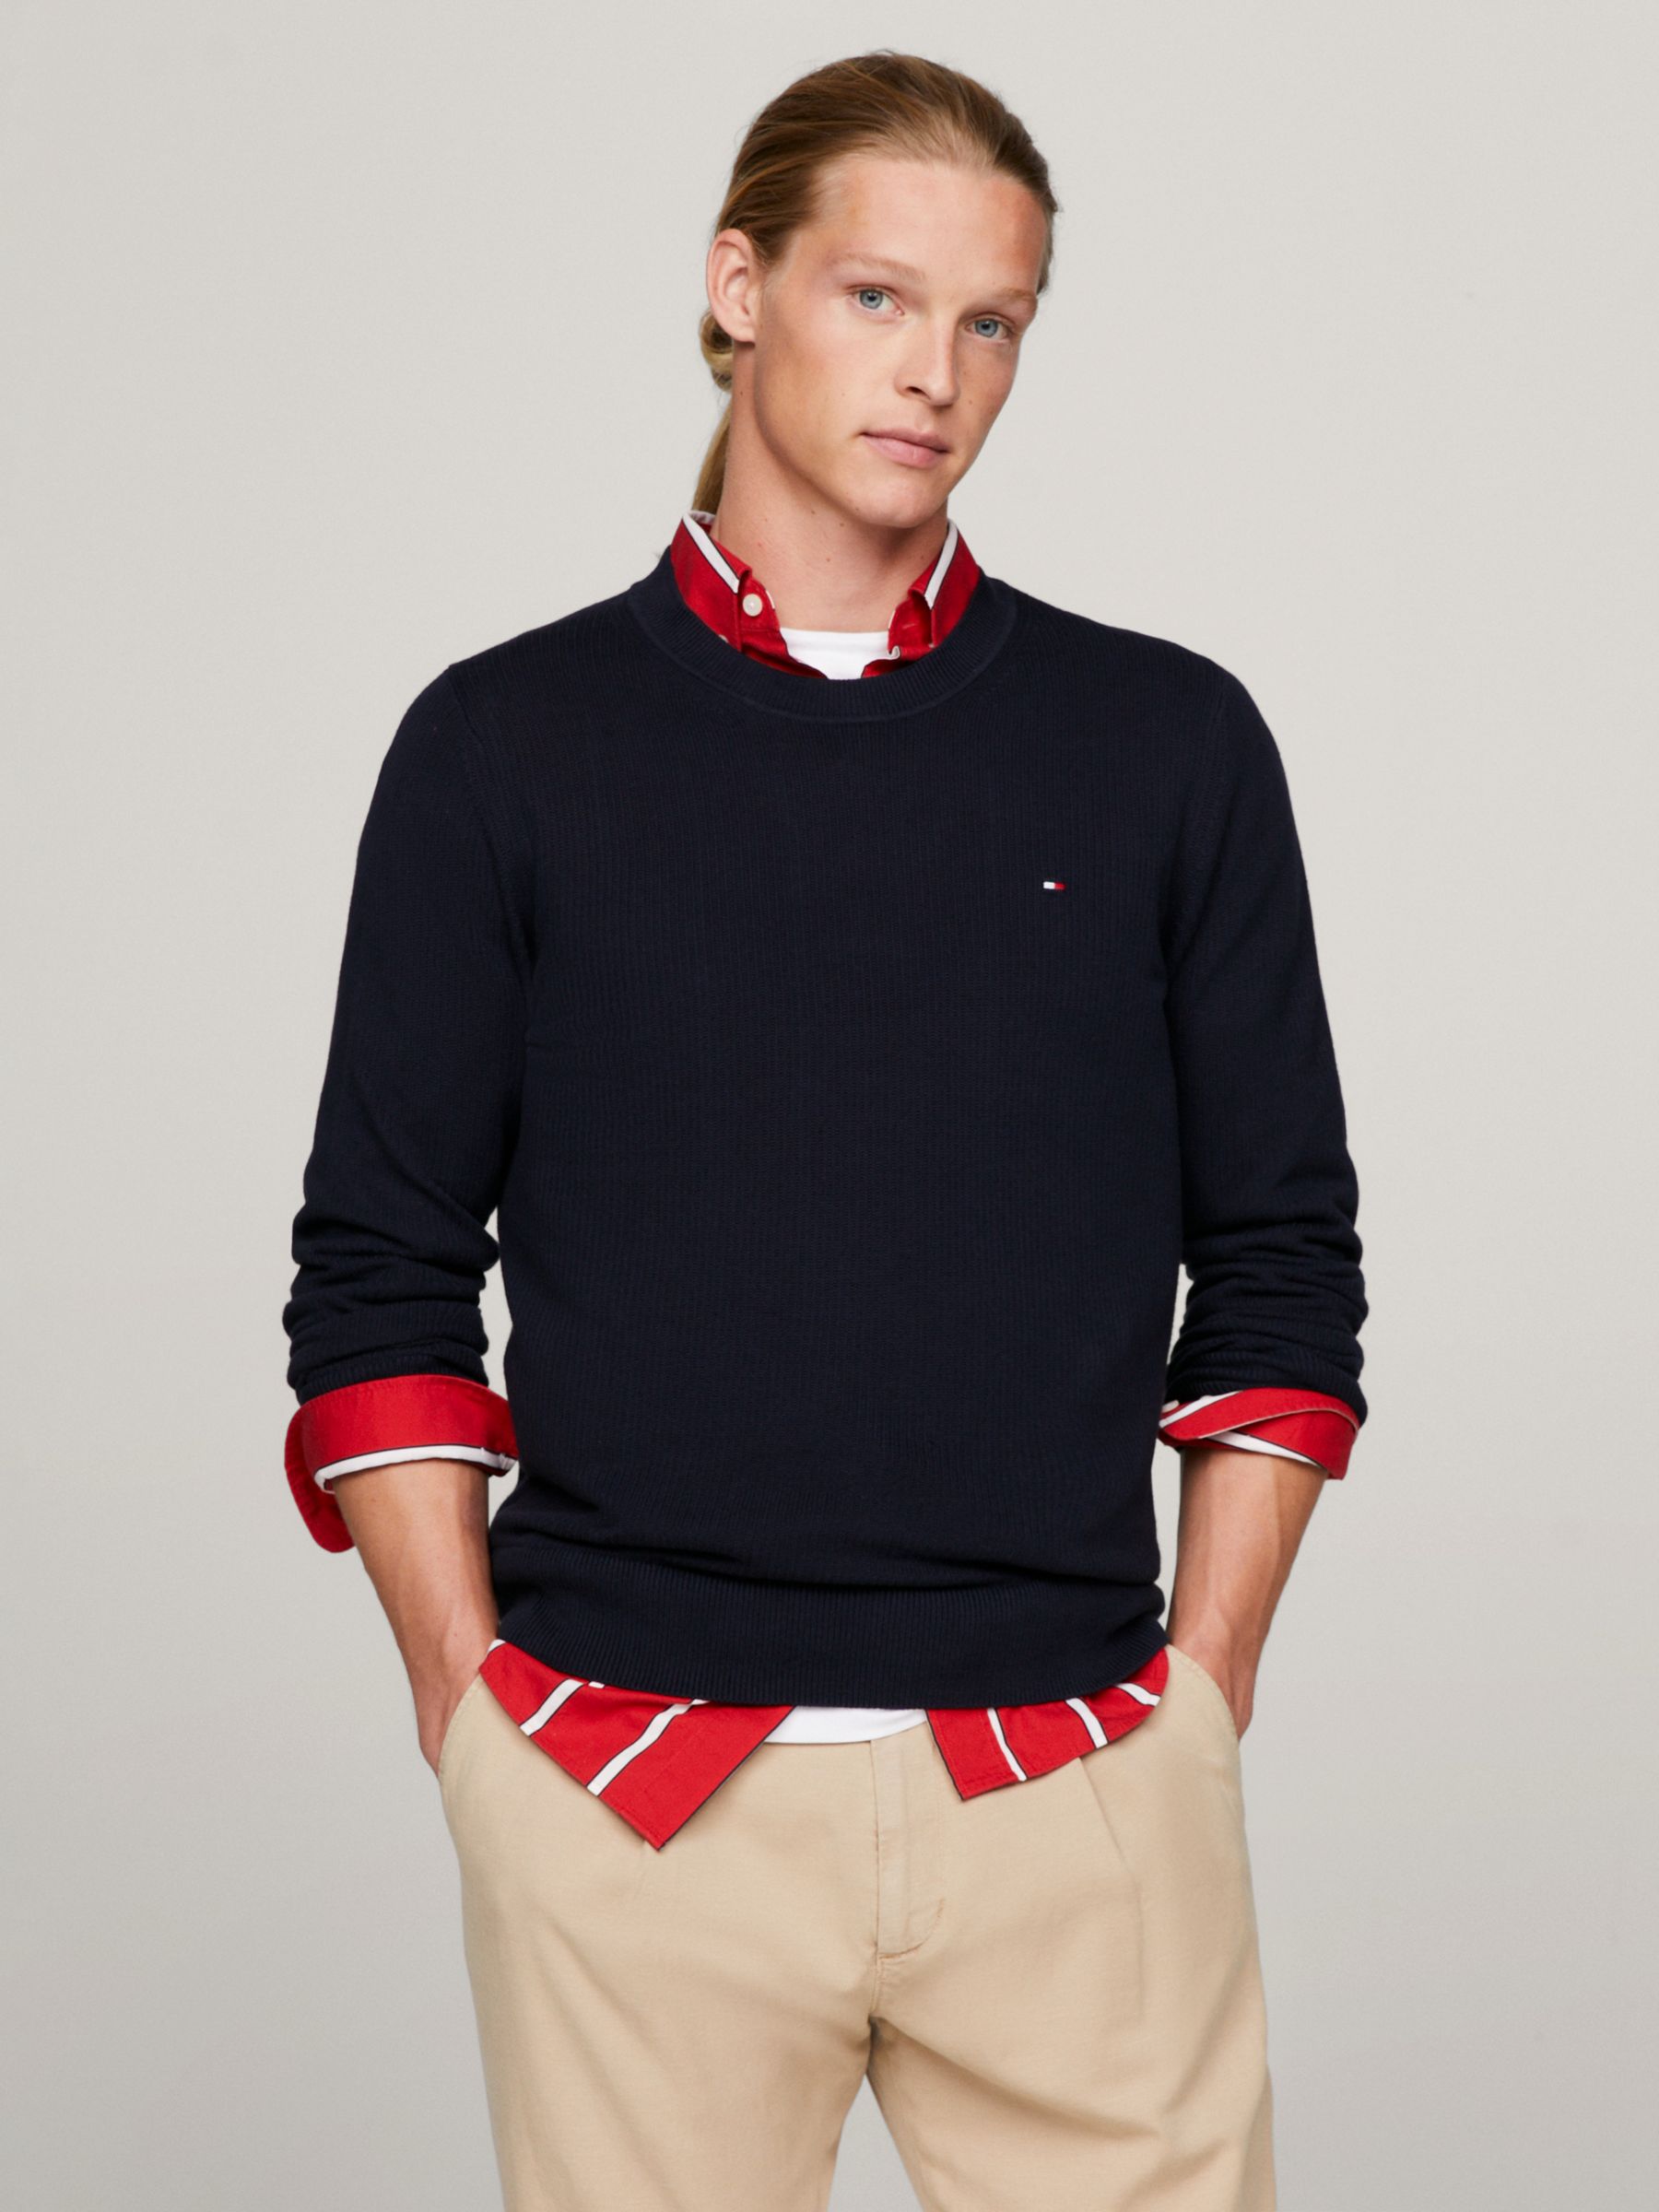 Tommy Hilfiger Chain Ridge Structure Jumper, Navy at John Lewis & Partners